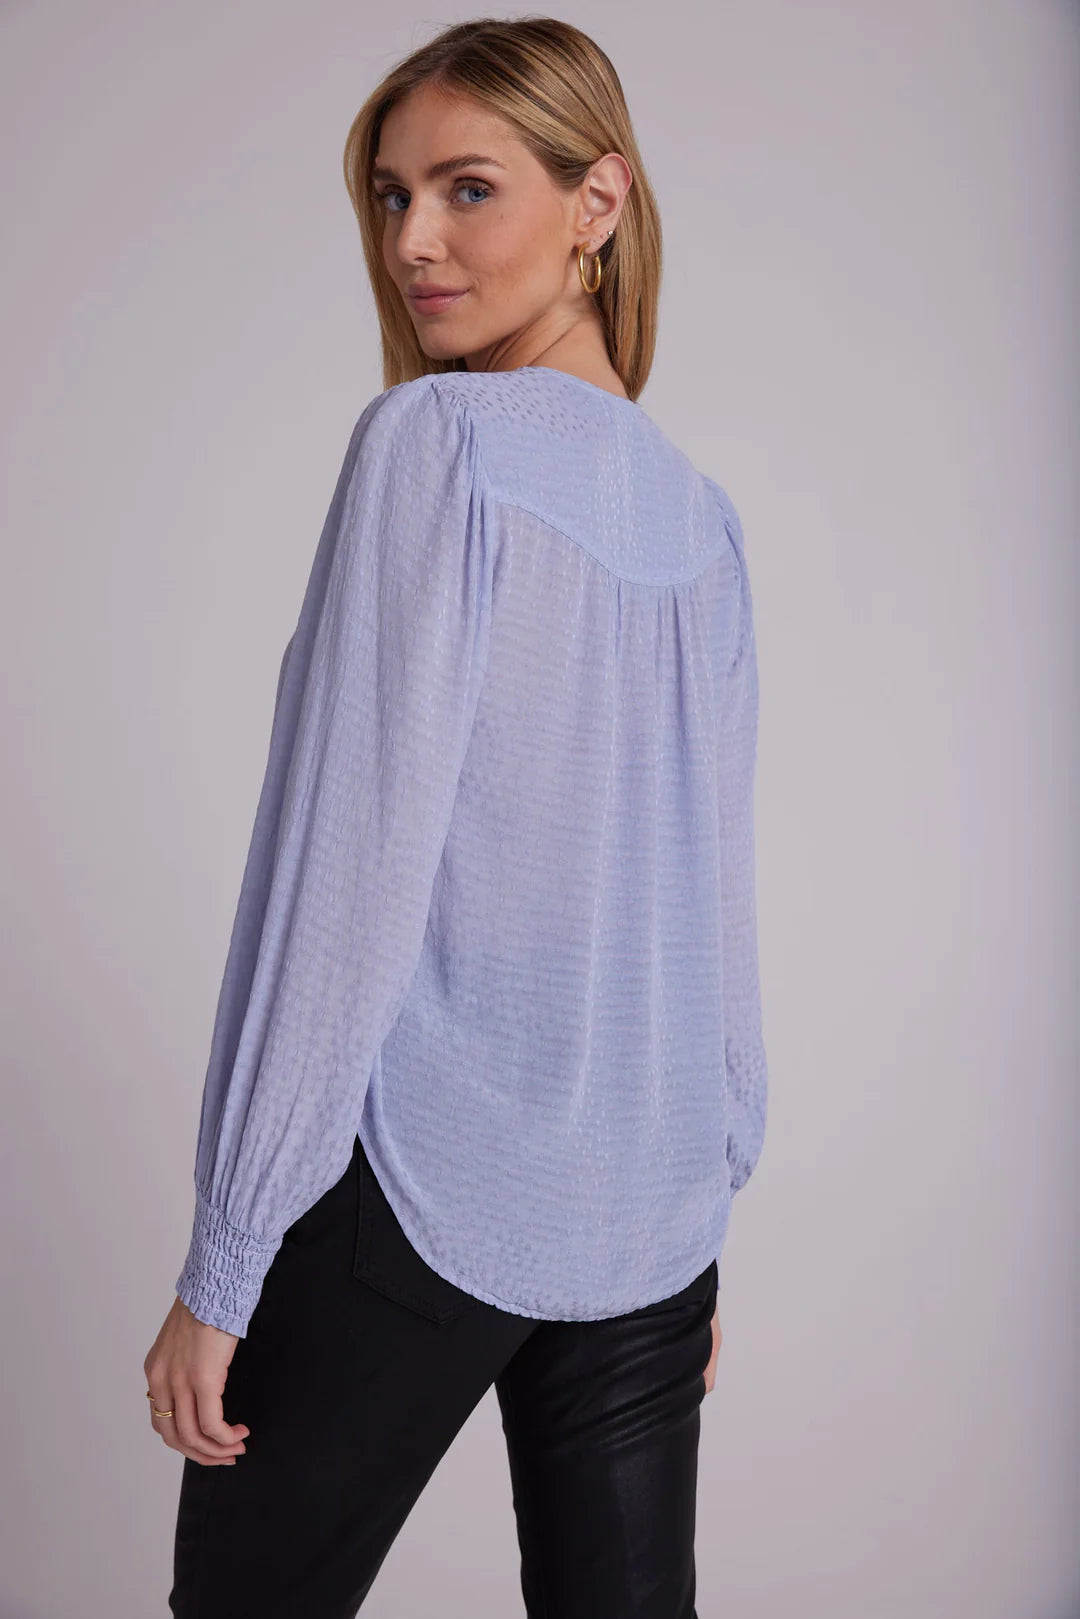 Smocked Cuff Button Down - Icy Peri